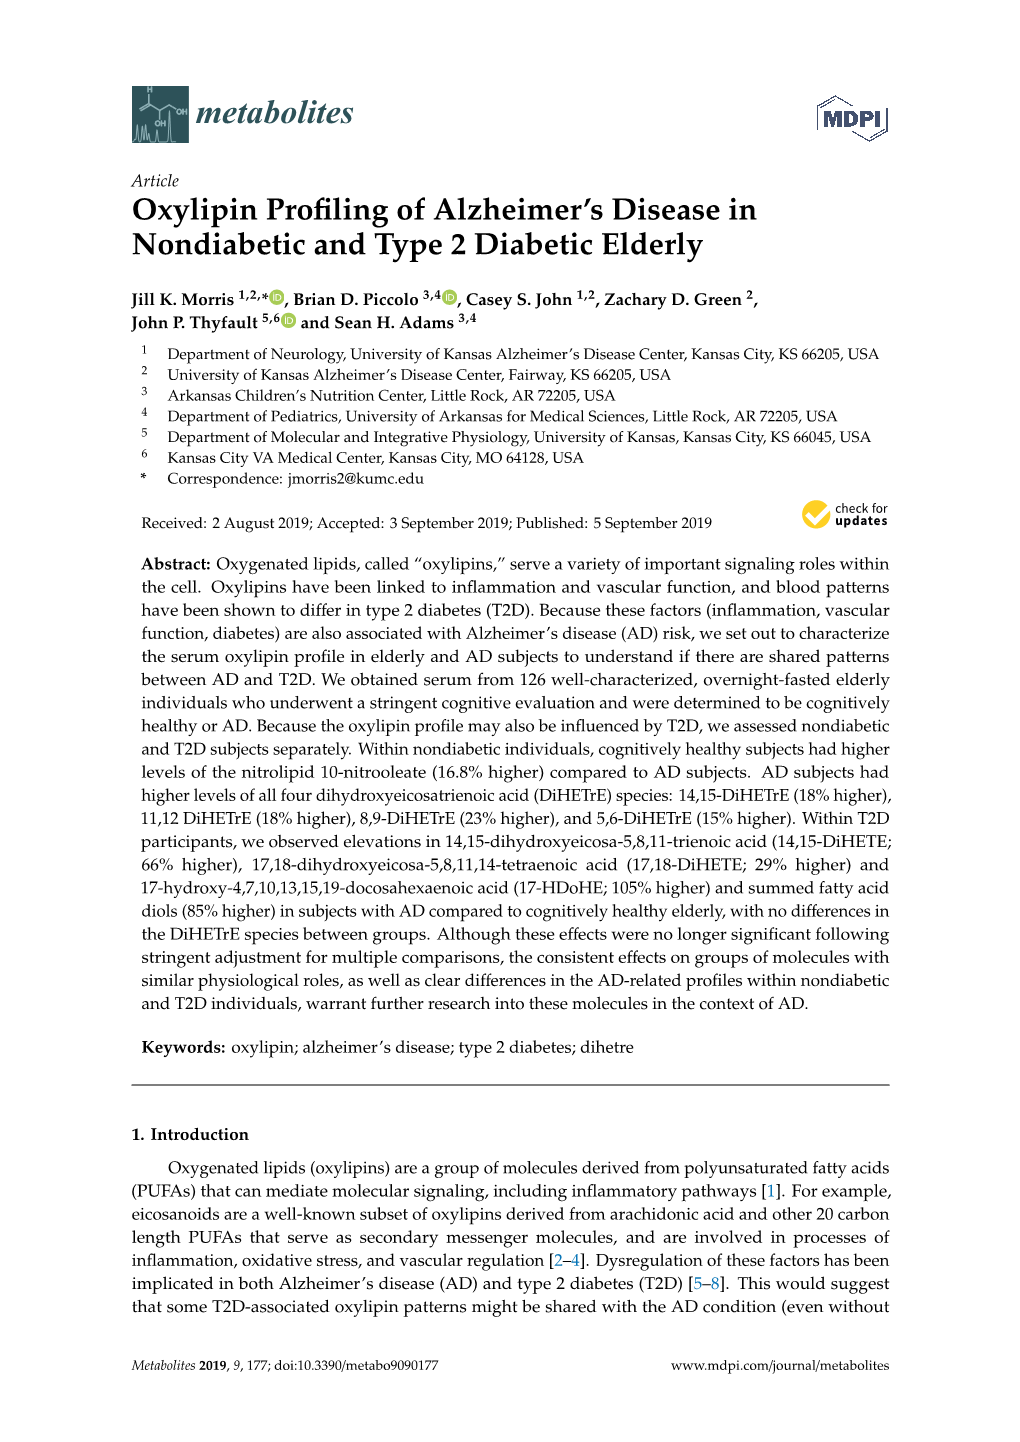 Oxylipin Profiling of Alzheimer's Disease in Nondiabetic and Type 2